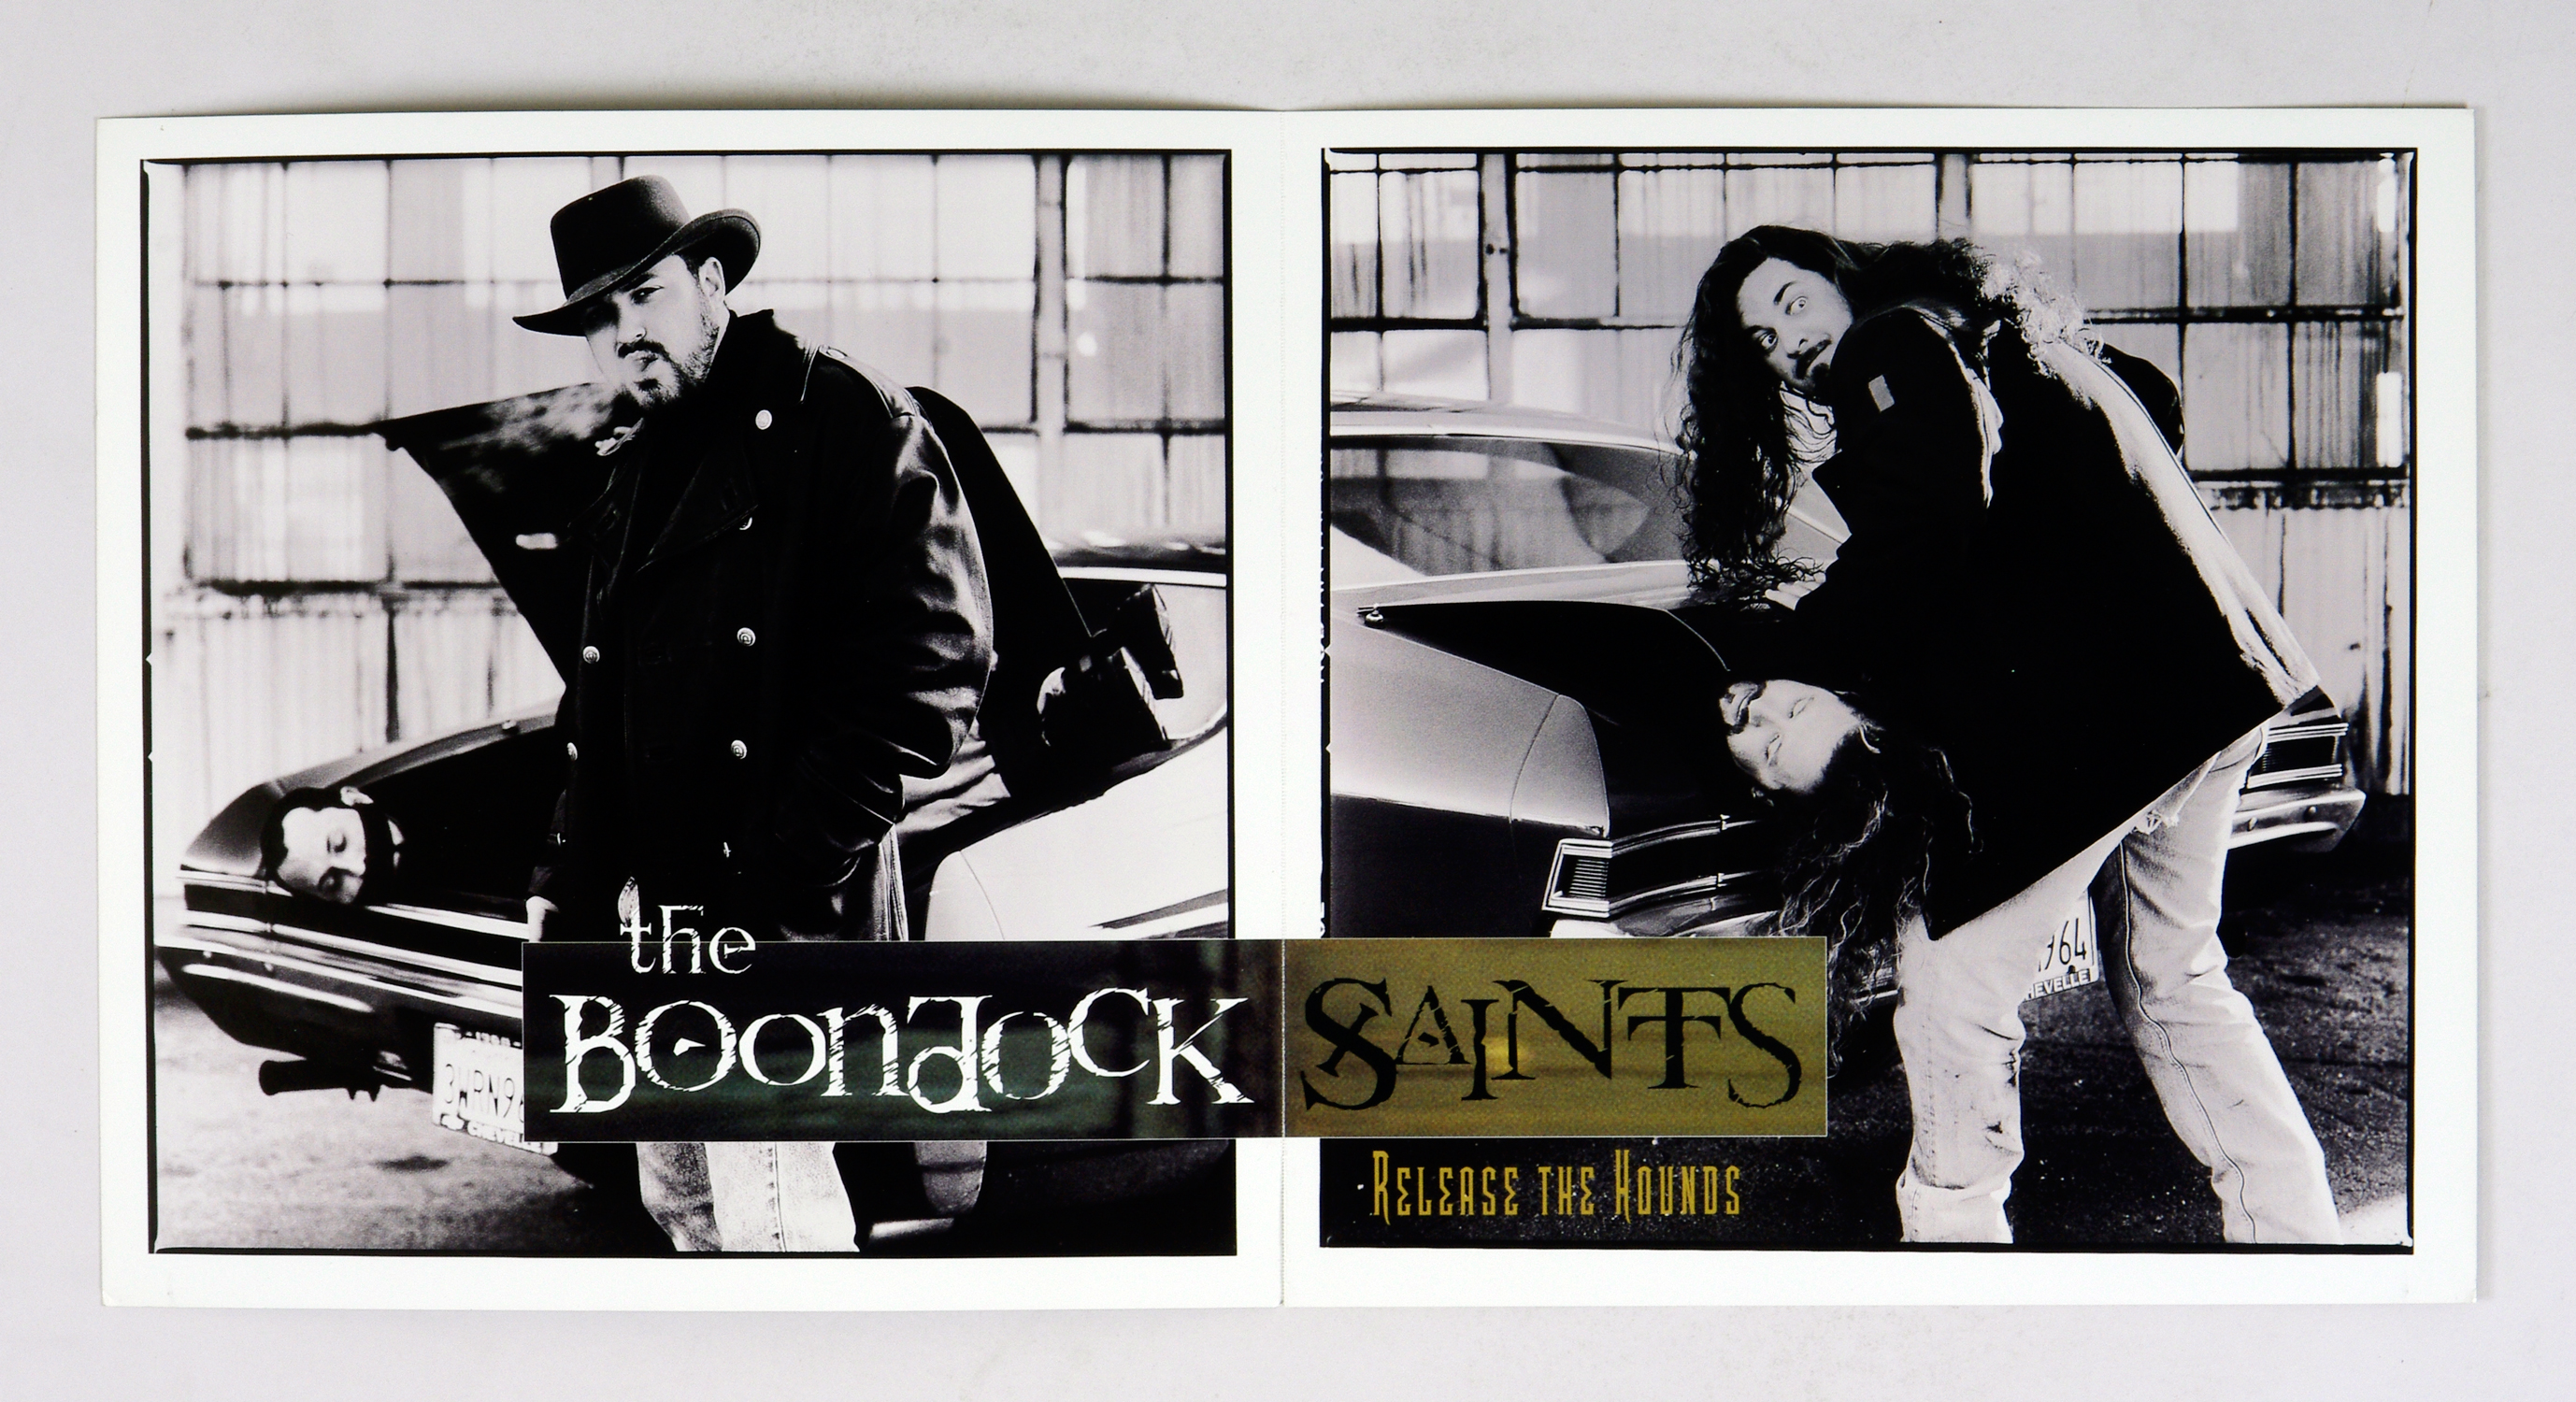 The Boondock Saints Poster Flat 2002 Release the Hounds Album Promotion 12 x 12 